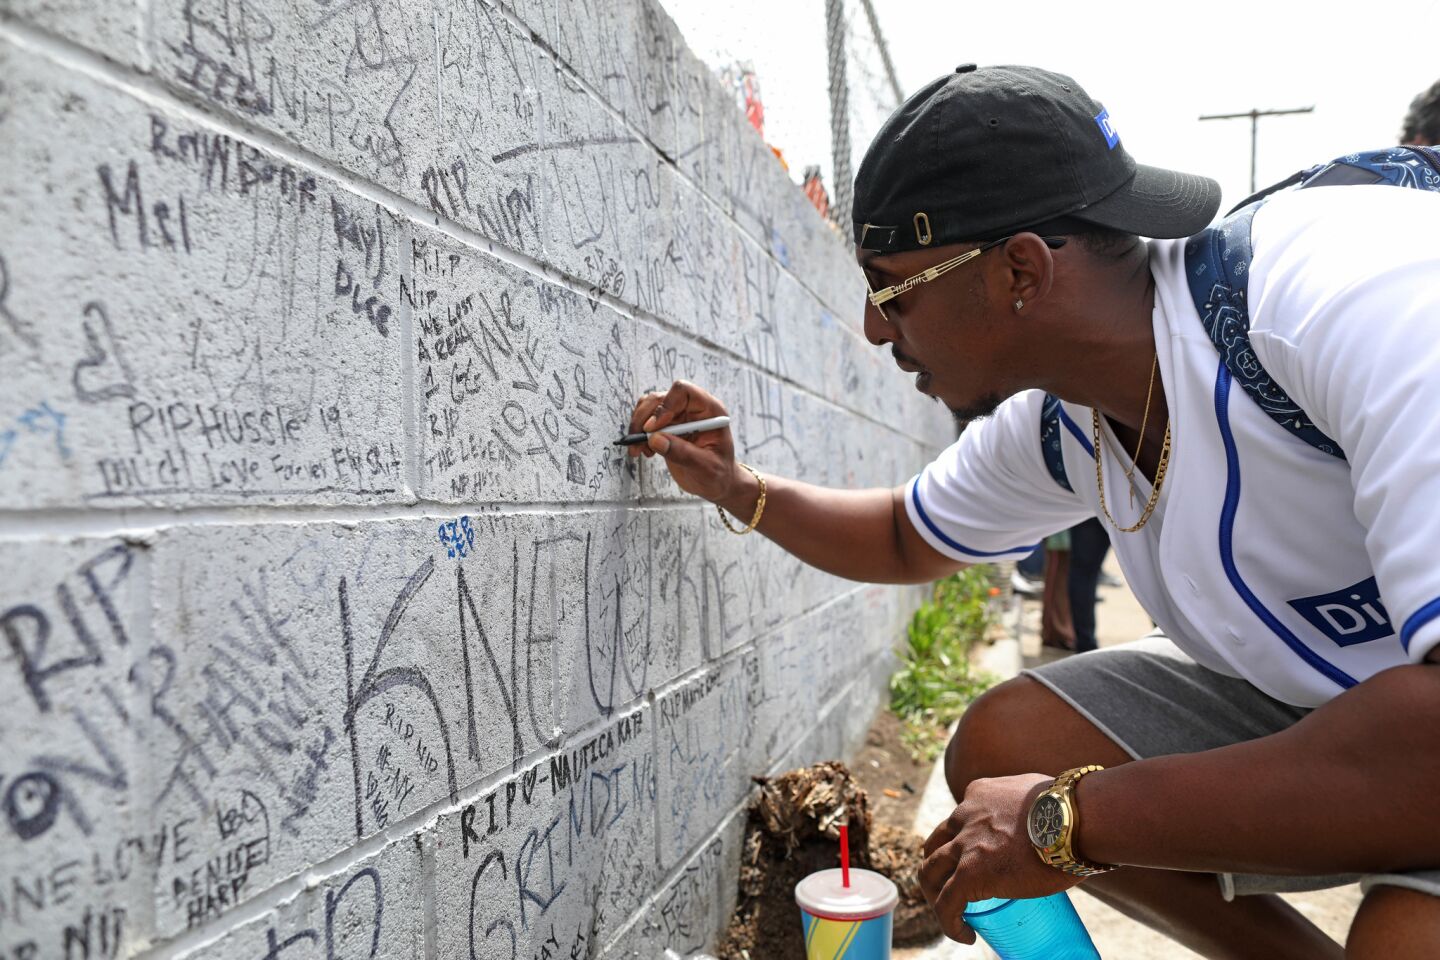 Herb Johnson of Los Angeles pays his respects to Nipsey Hussle on a wall near the late rapper's Marathon Clothing store.